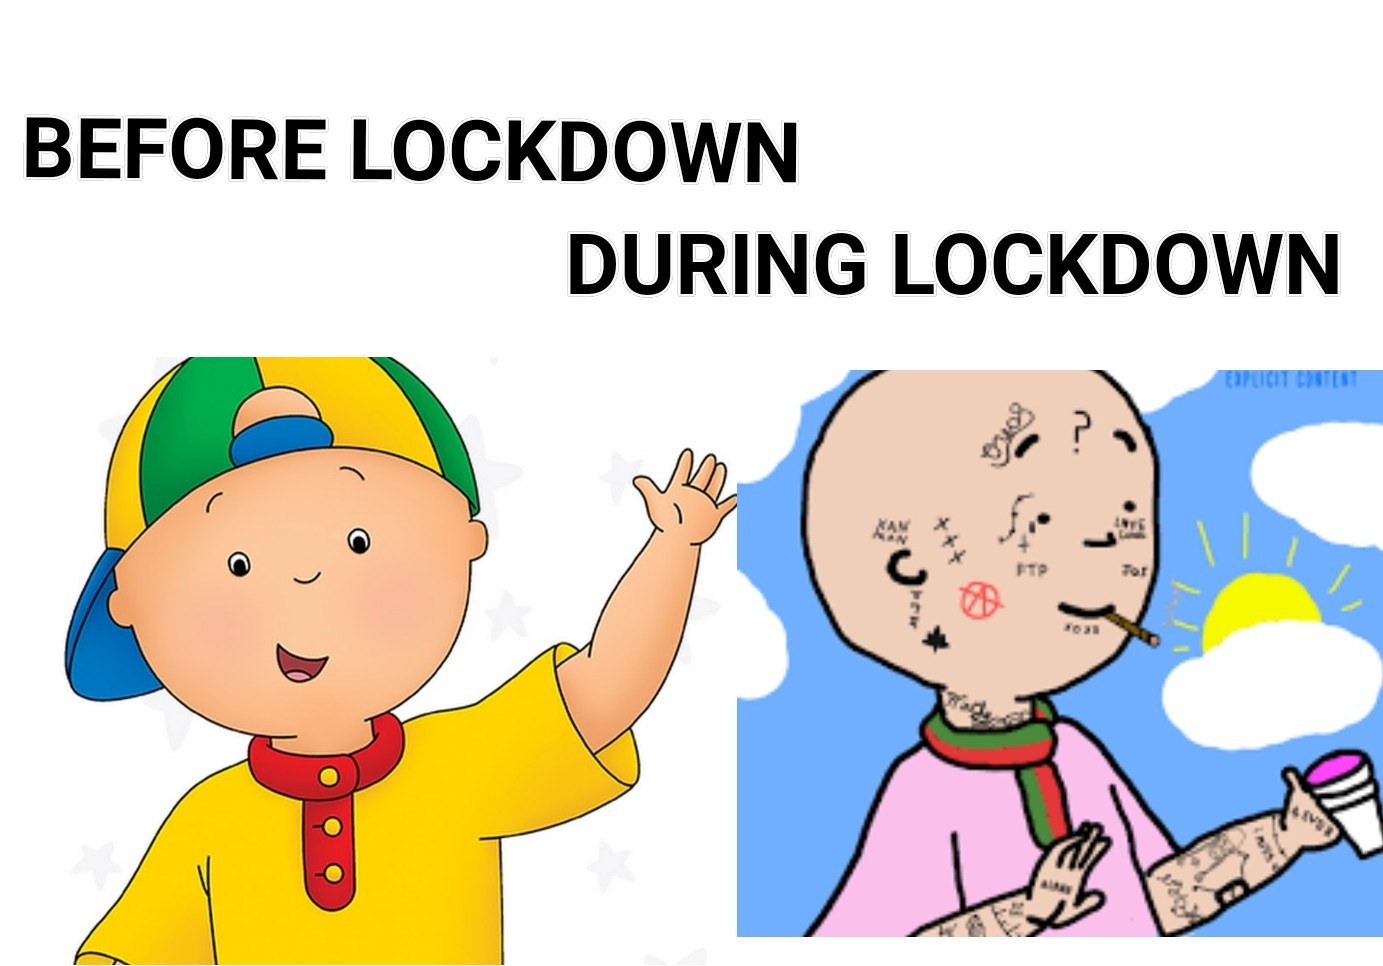 Before and after caillou - meme